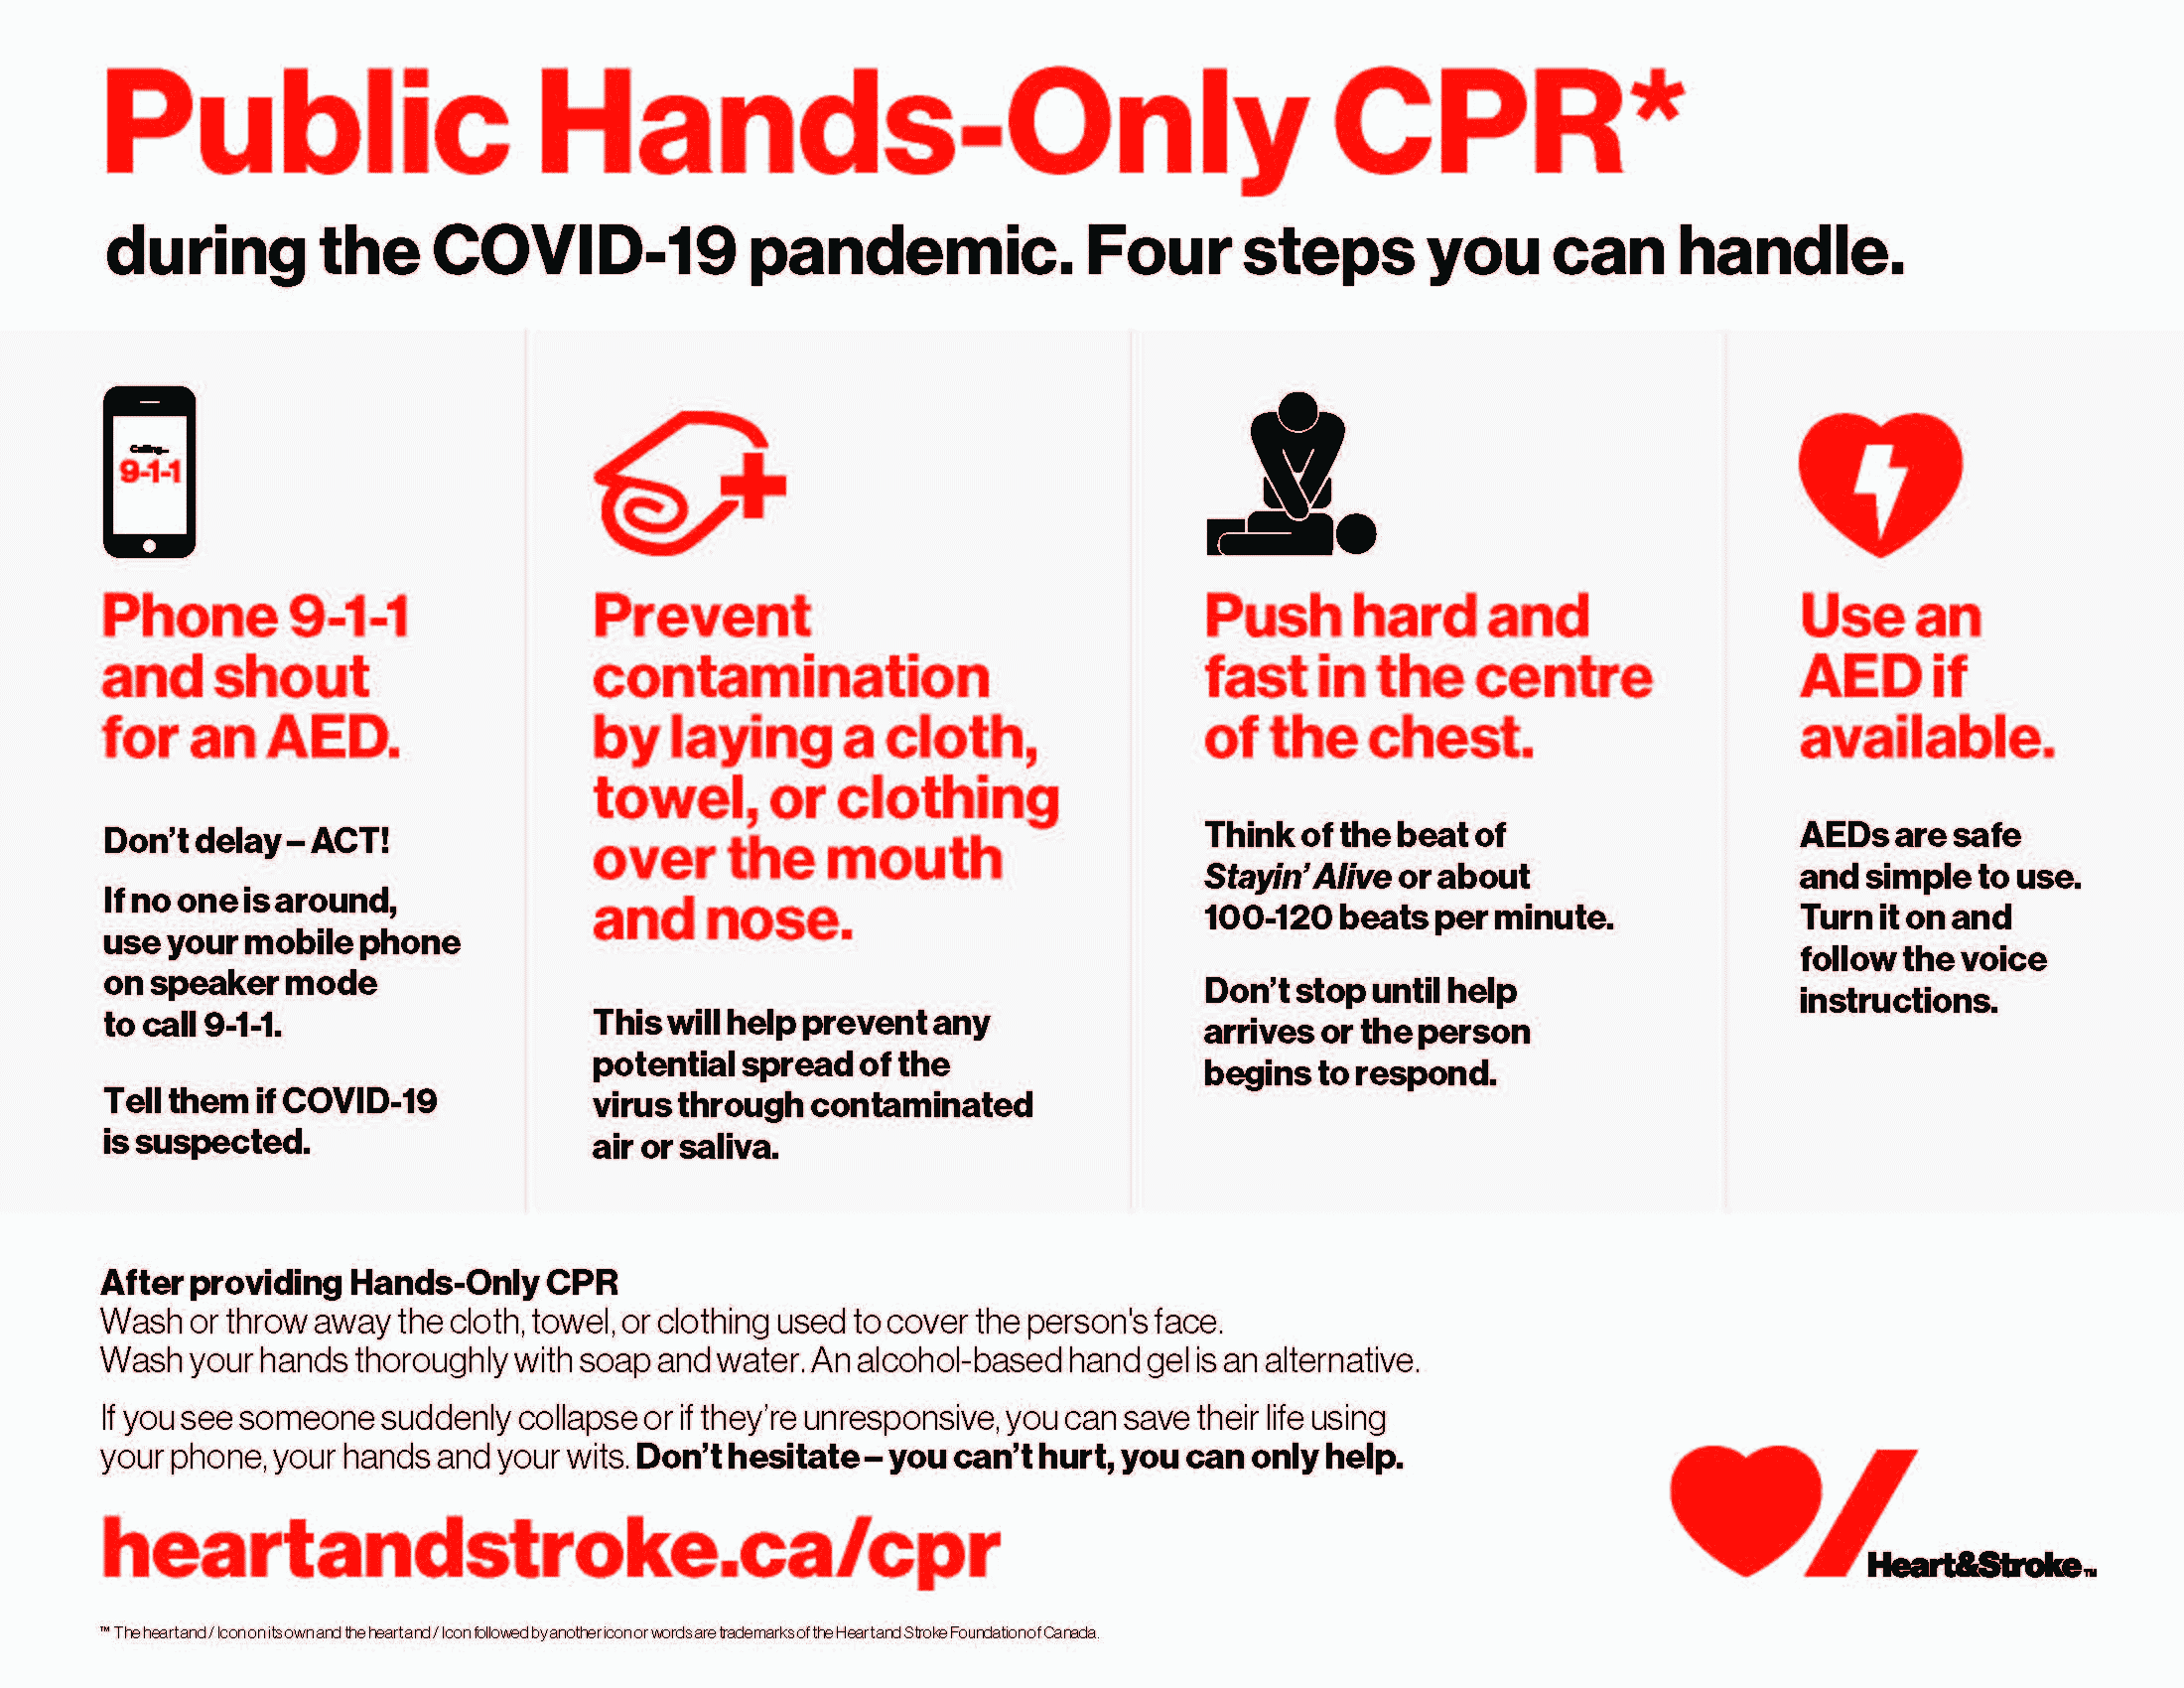 public hands only cpr. heart and stroke